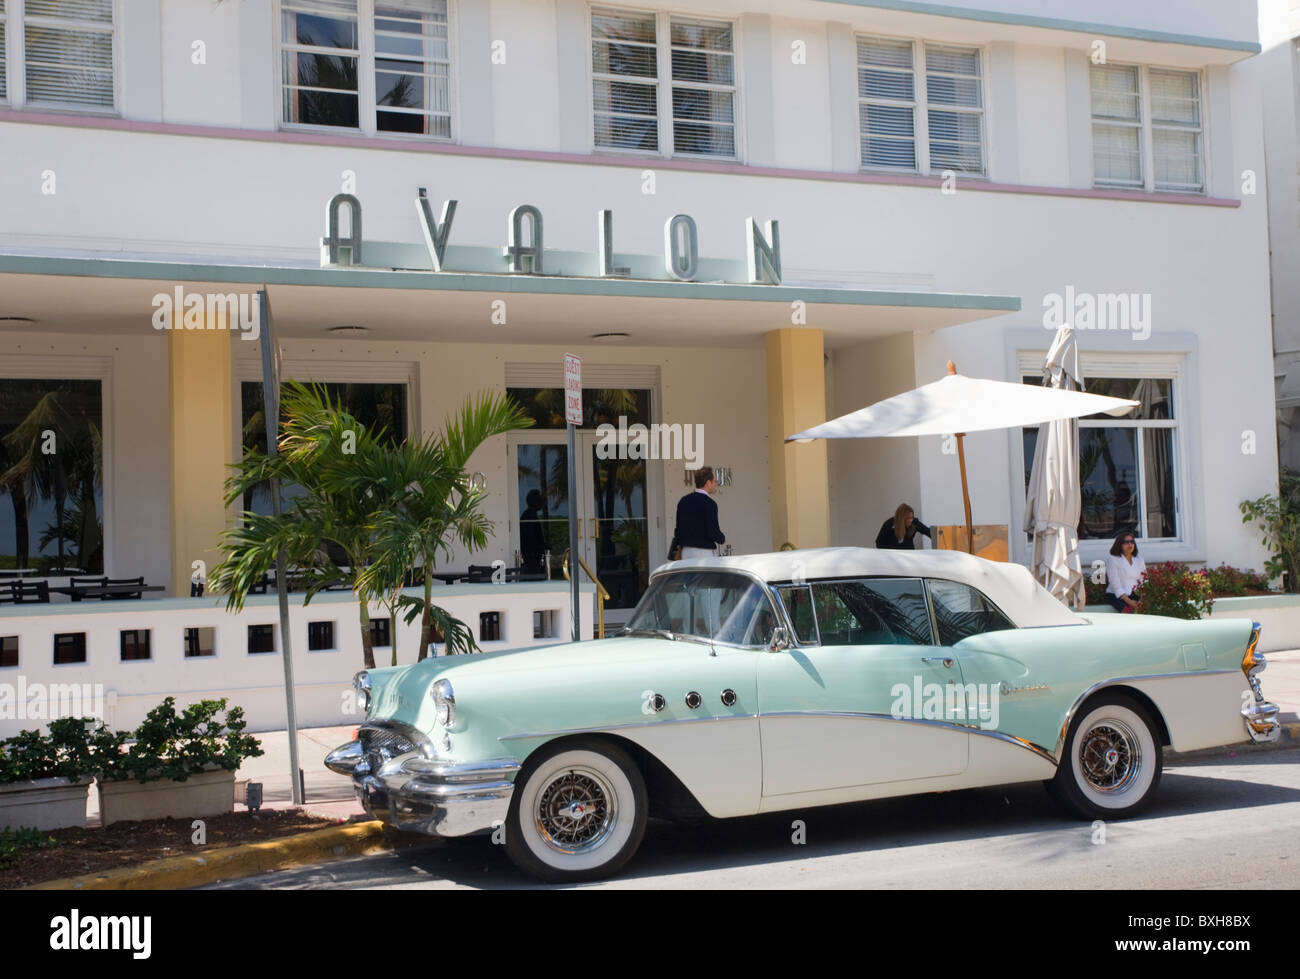 Classic Buick 1955 Special Convertible automobile at Avalon Hotel in Ocean Drive, South Beach, Miami, Florida Stock Photo